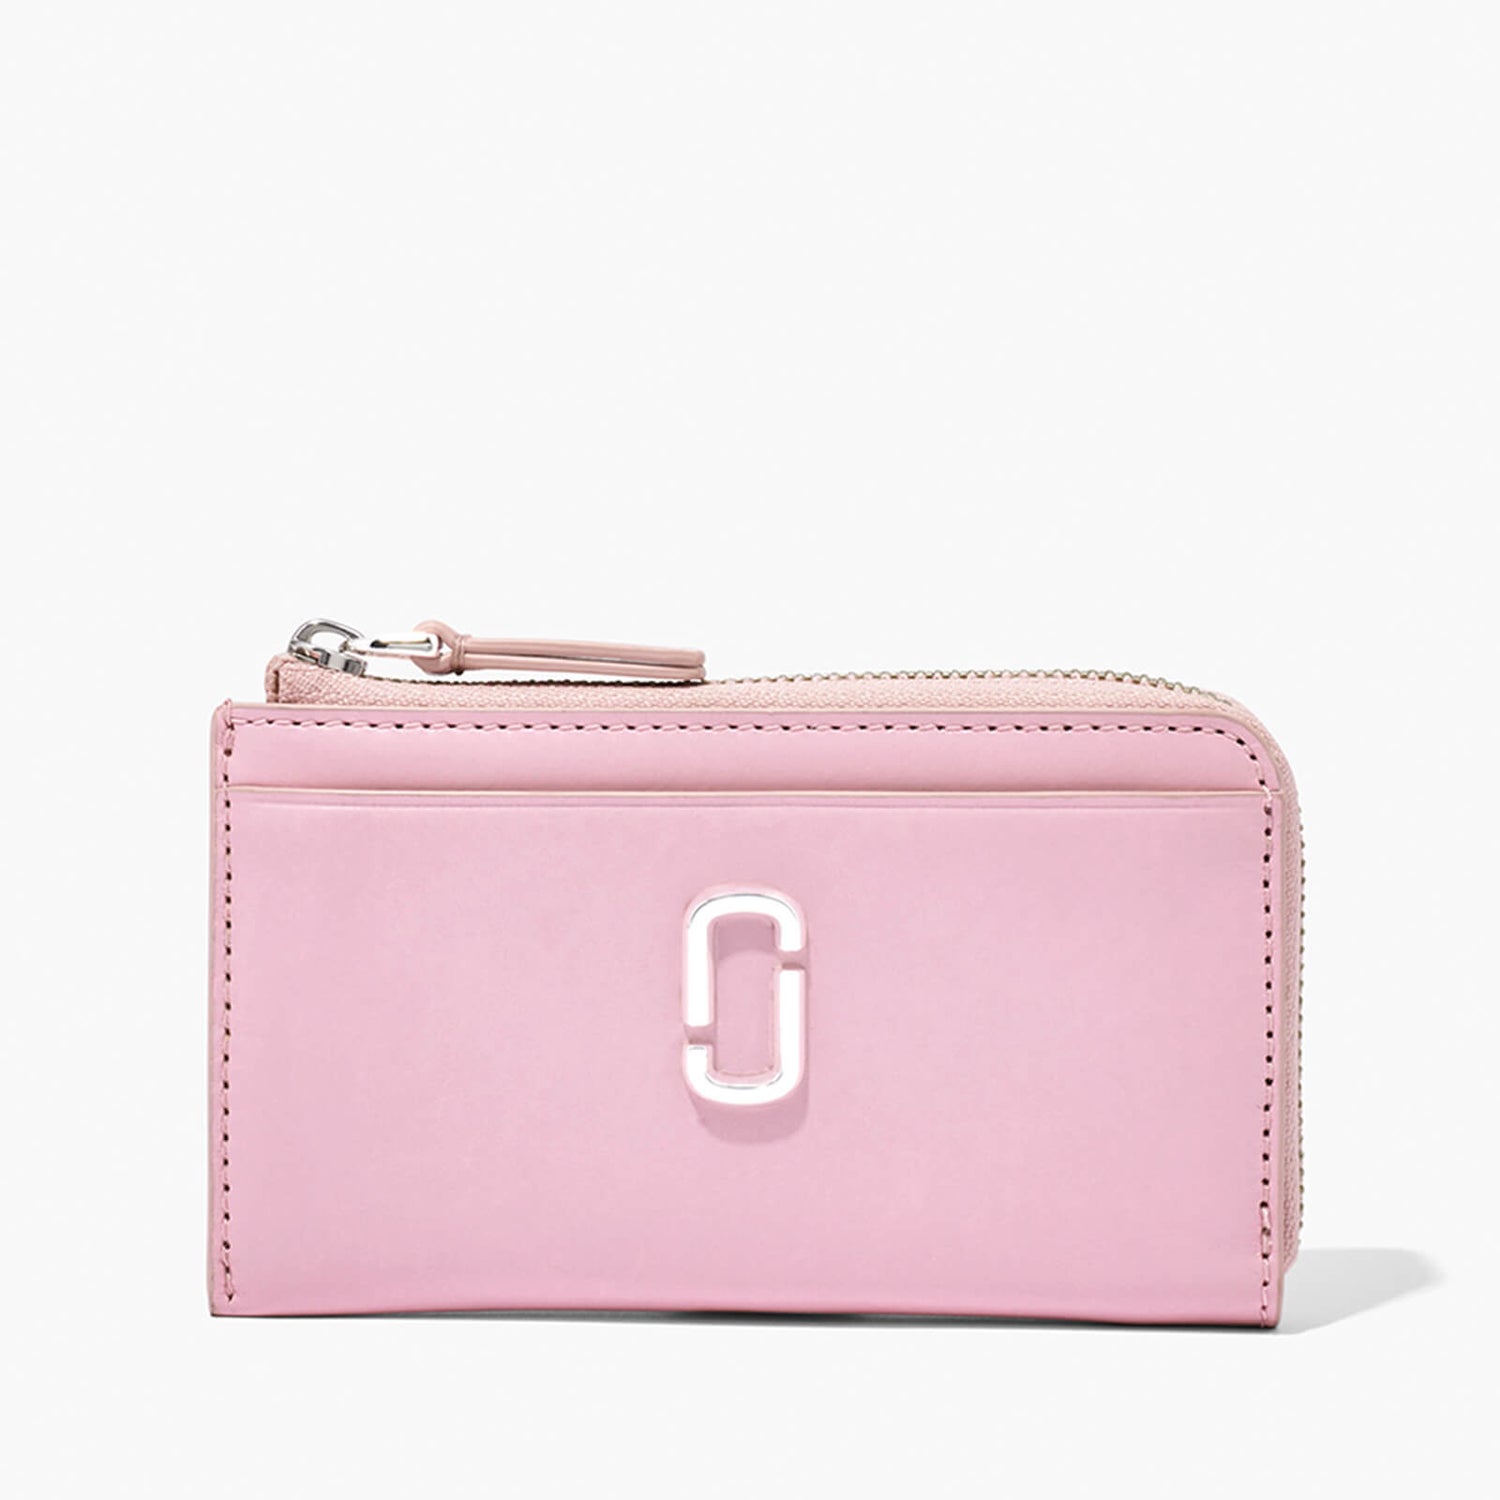 Marc Jacobs The J Marc Leather Wallet